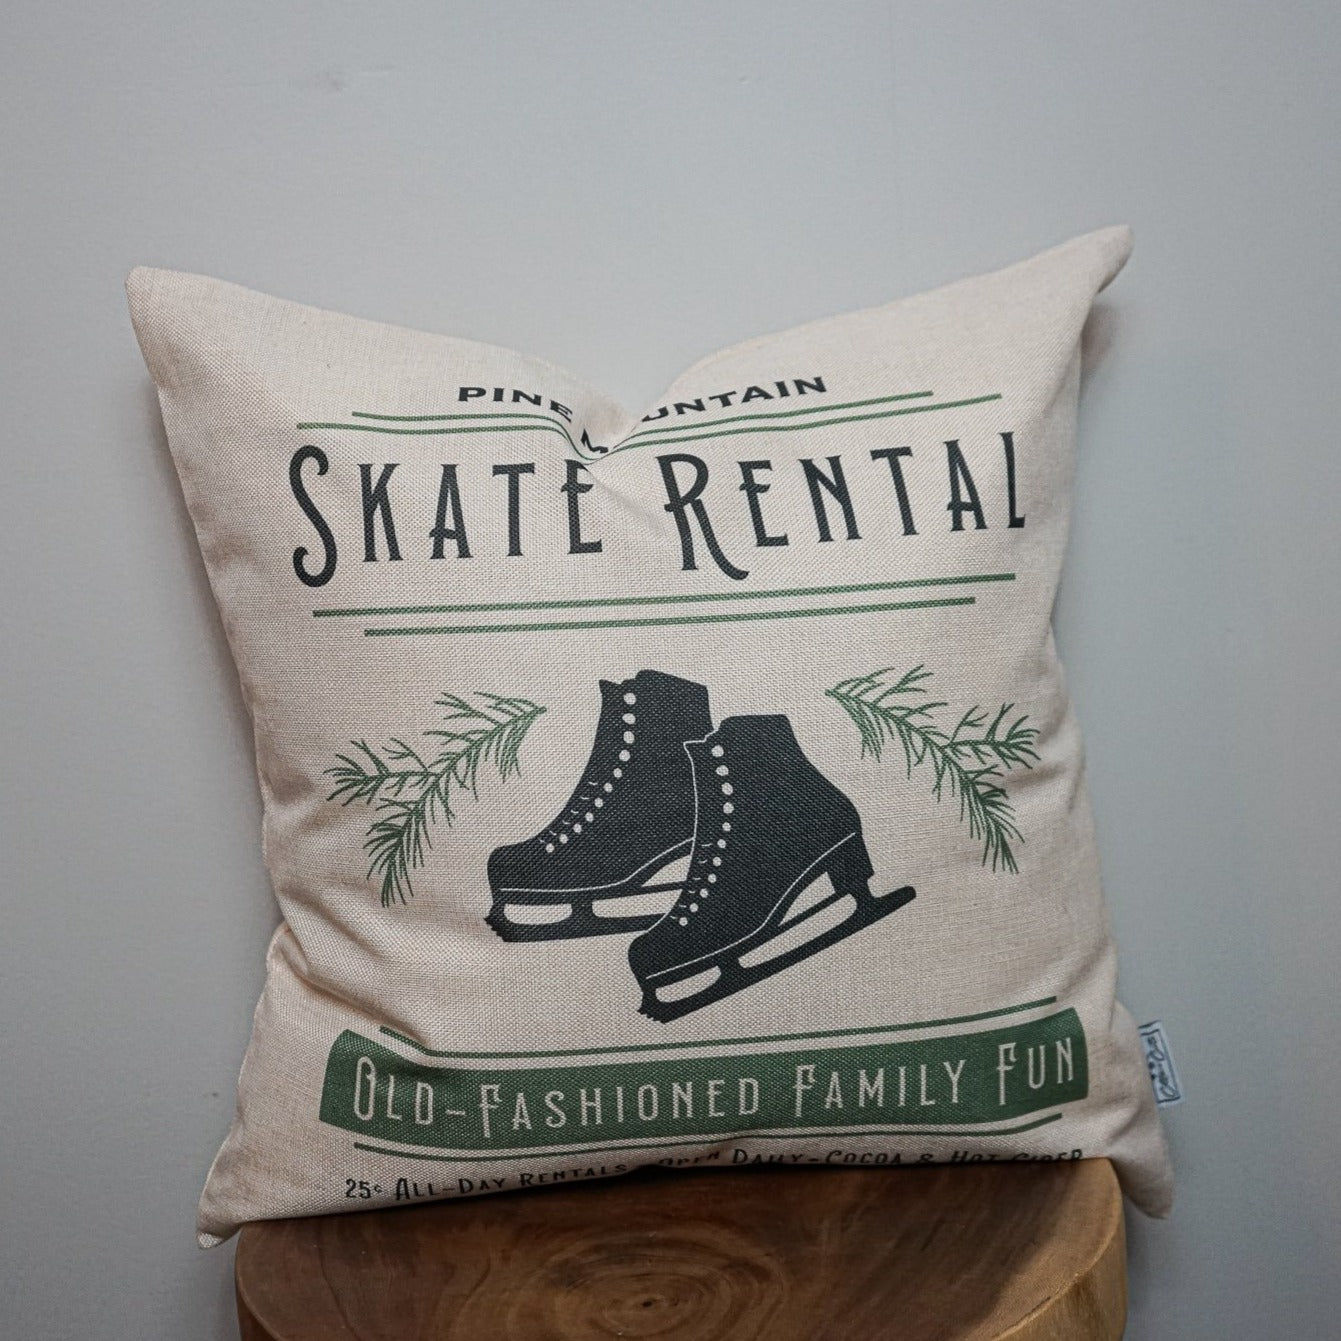 Old Fashioned Skate Rental Pillow Cover. 17 x 17”